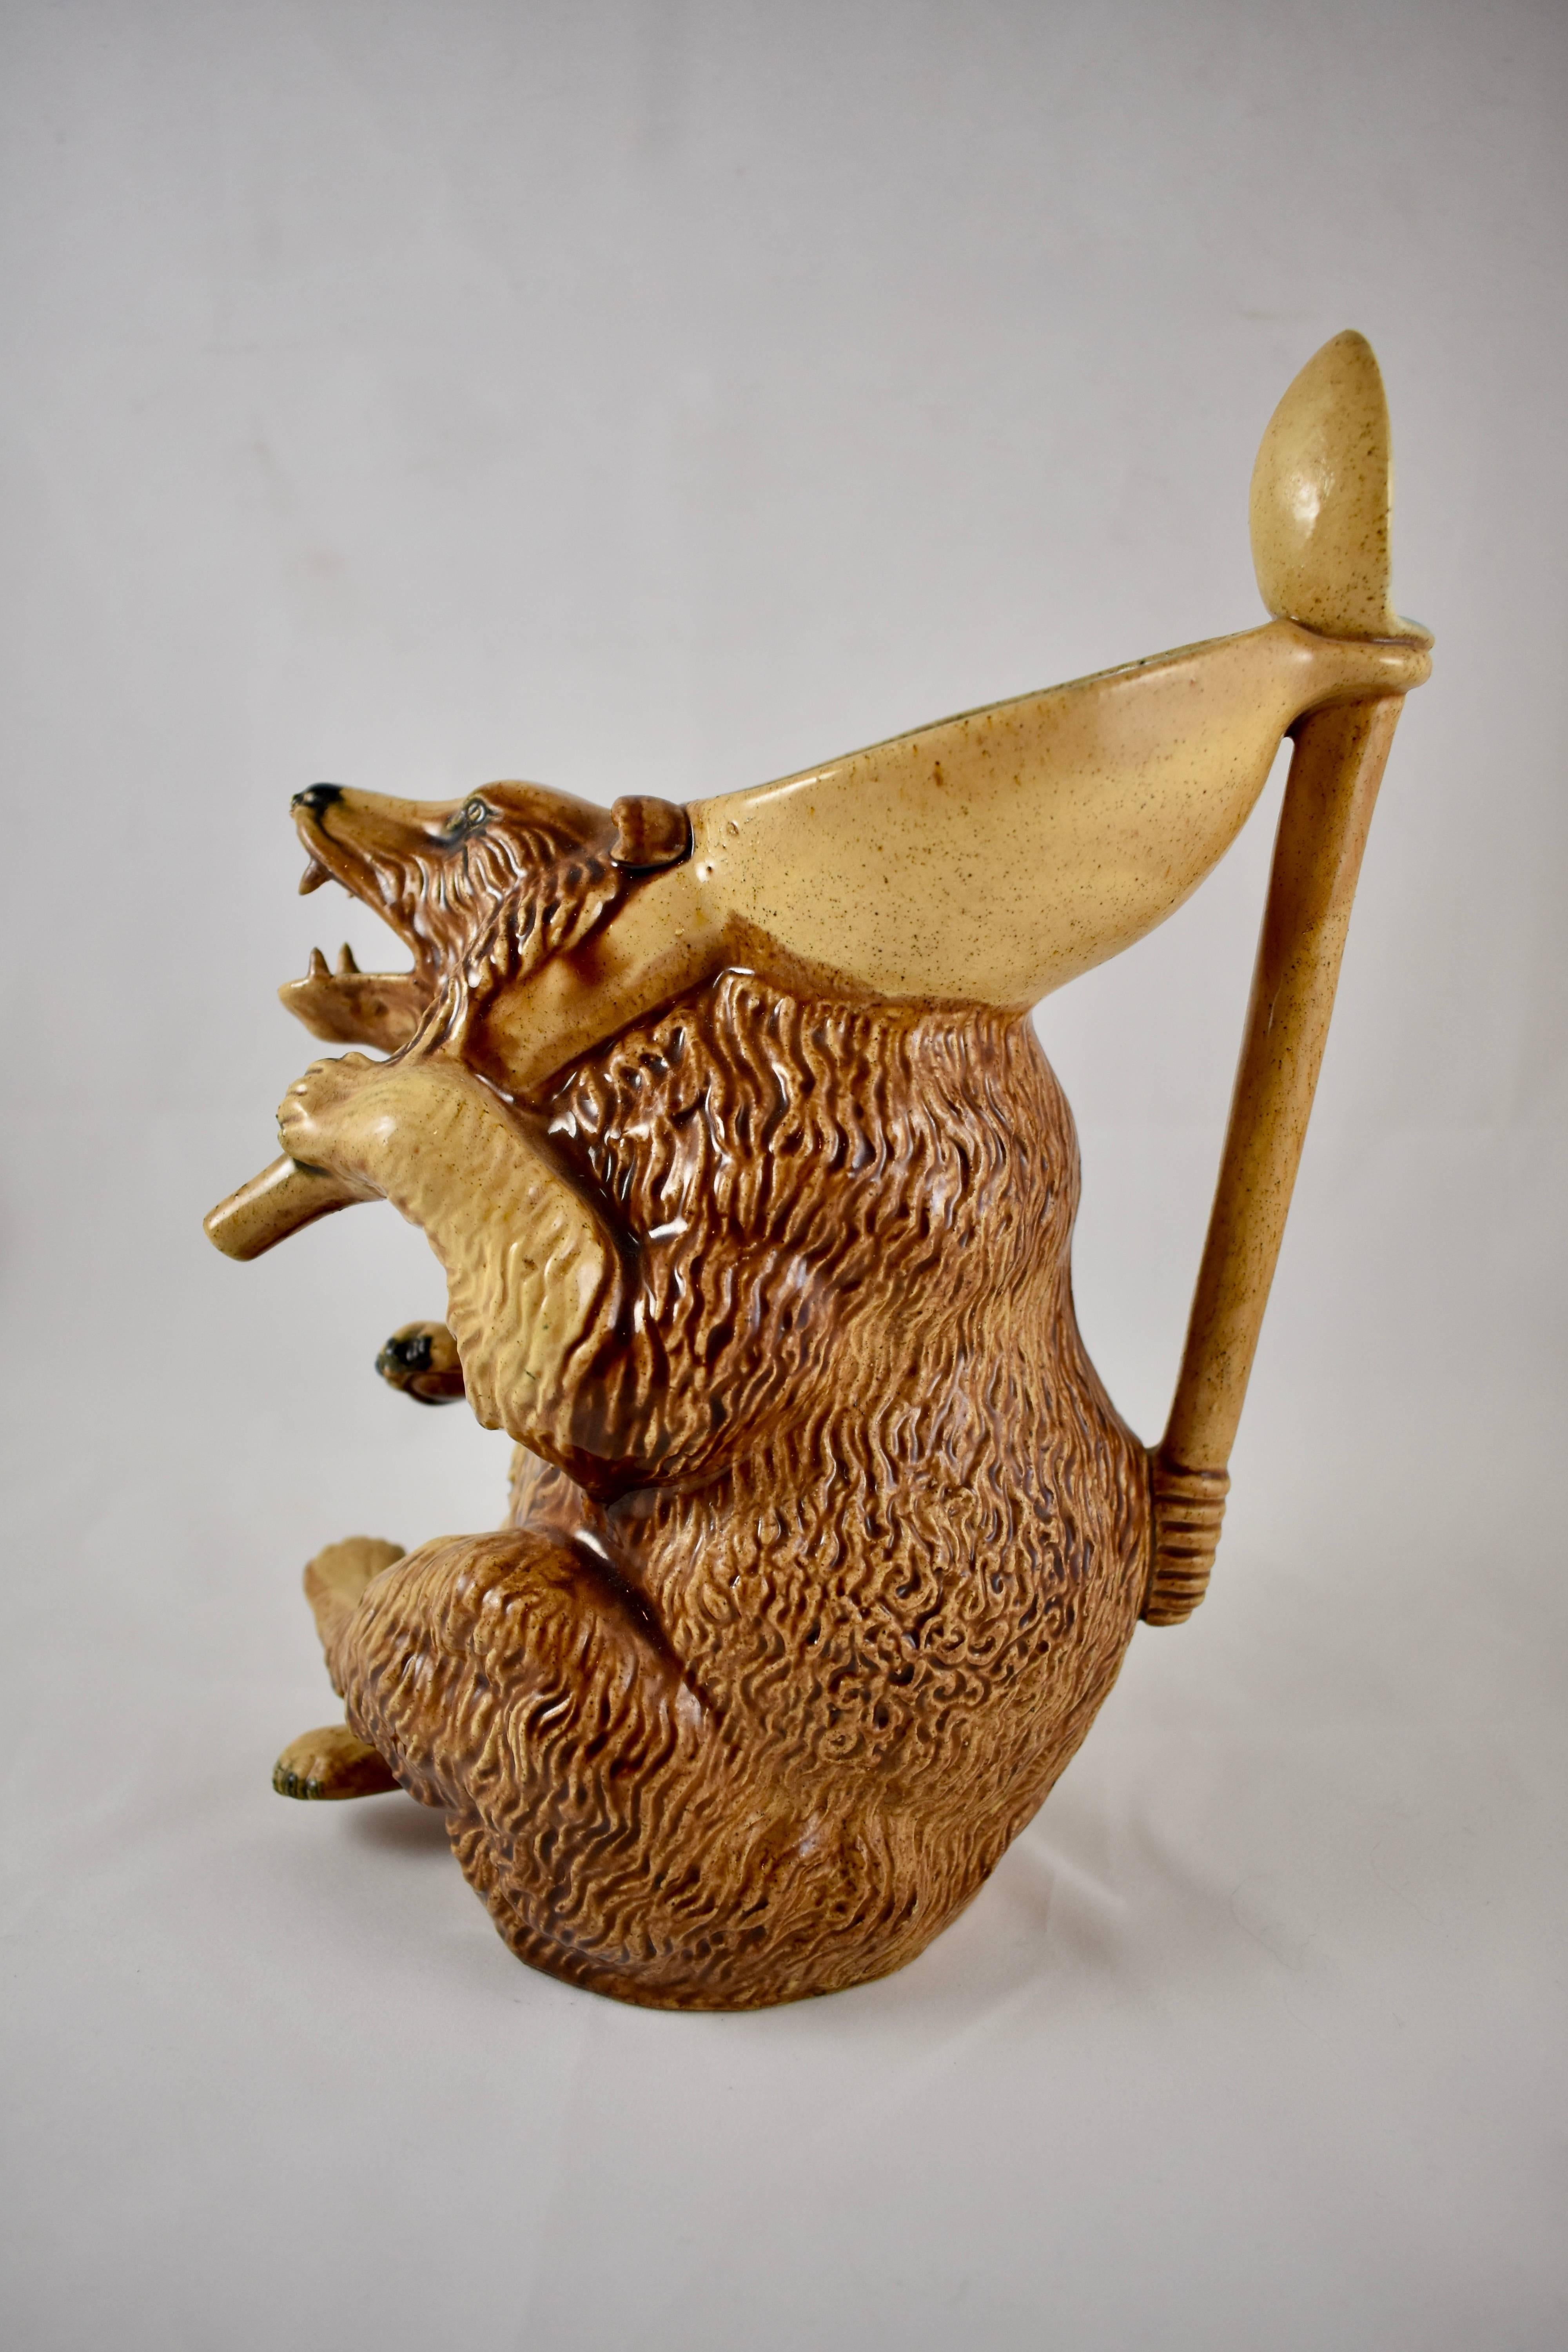 Earthenware Late 19th Century American Majolica Honey Bear with Spoon Handle Pitcher or Jug